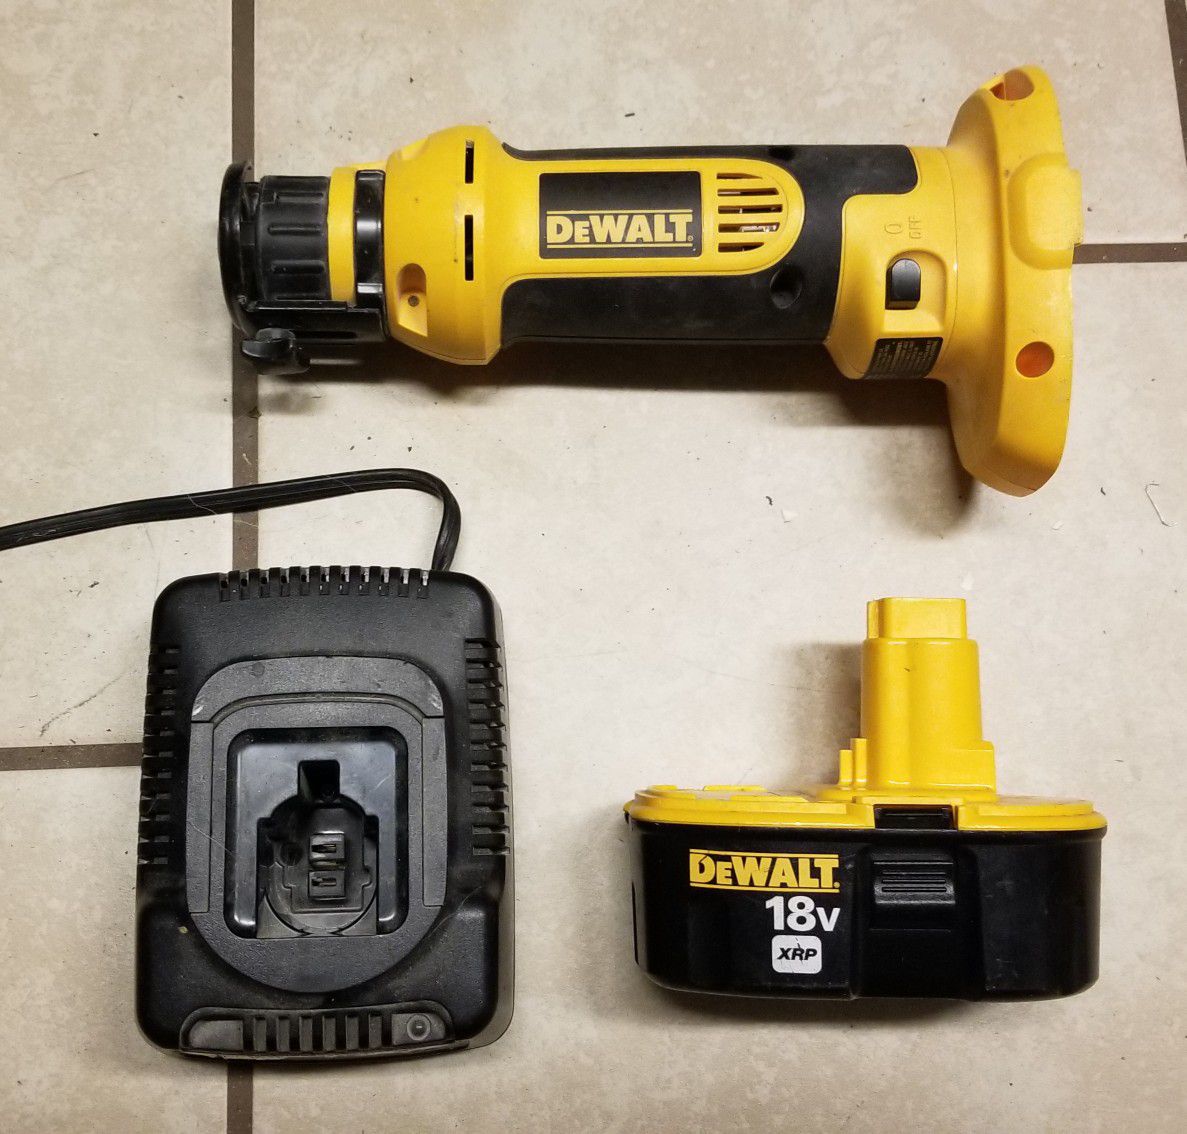 DeWalt 18v cut out tool, Battery, and charger